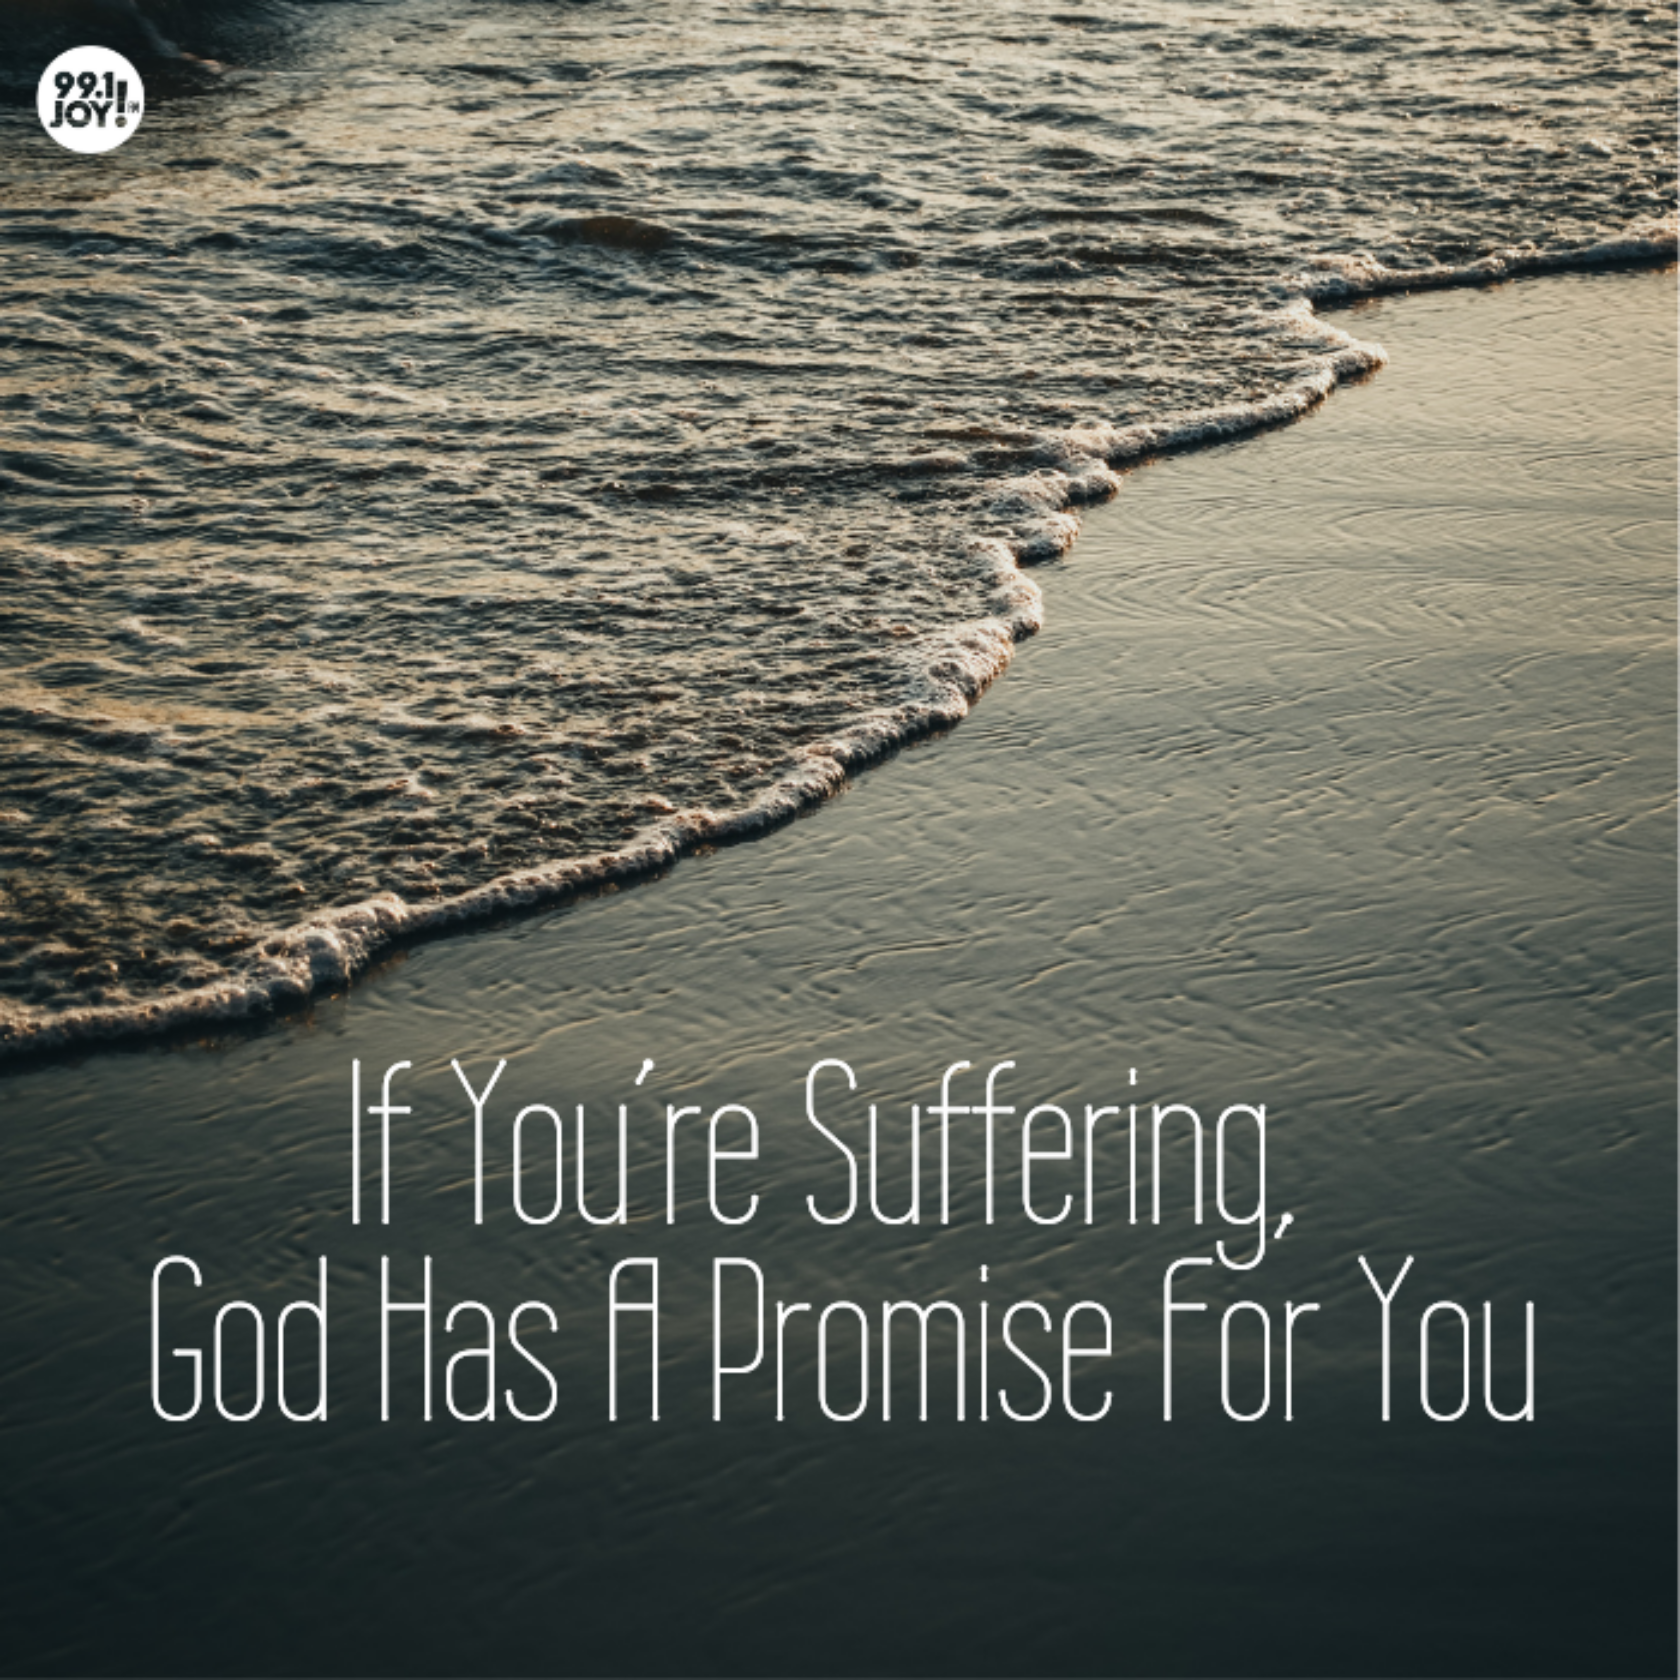 If You’re Suffering, God Has A Promise For You